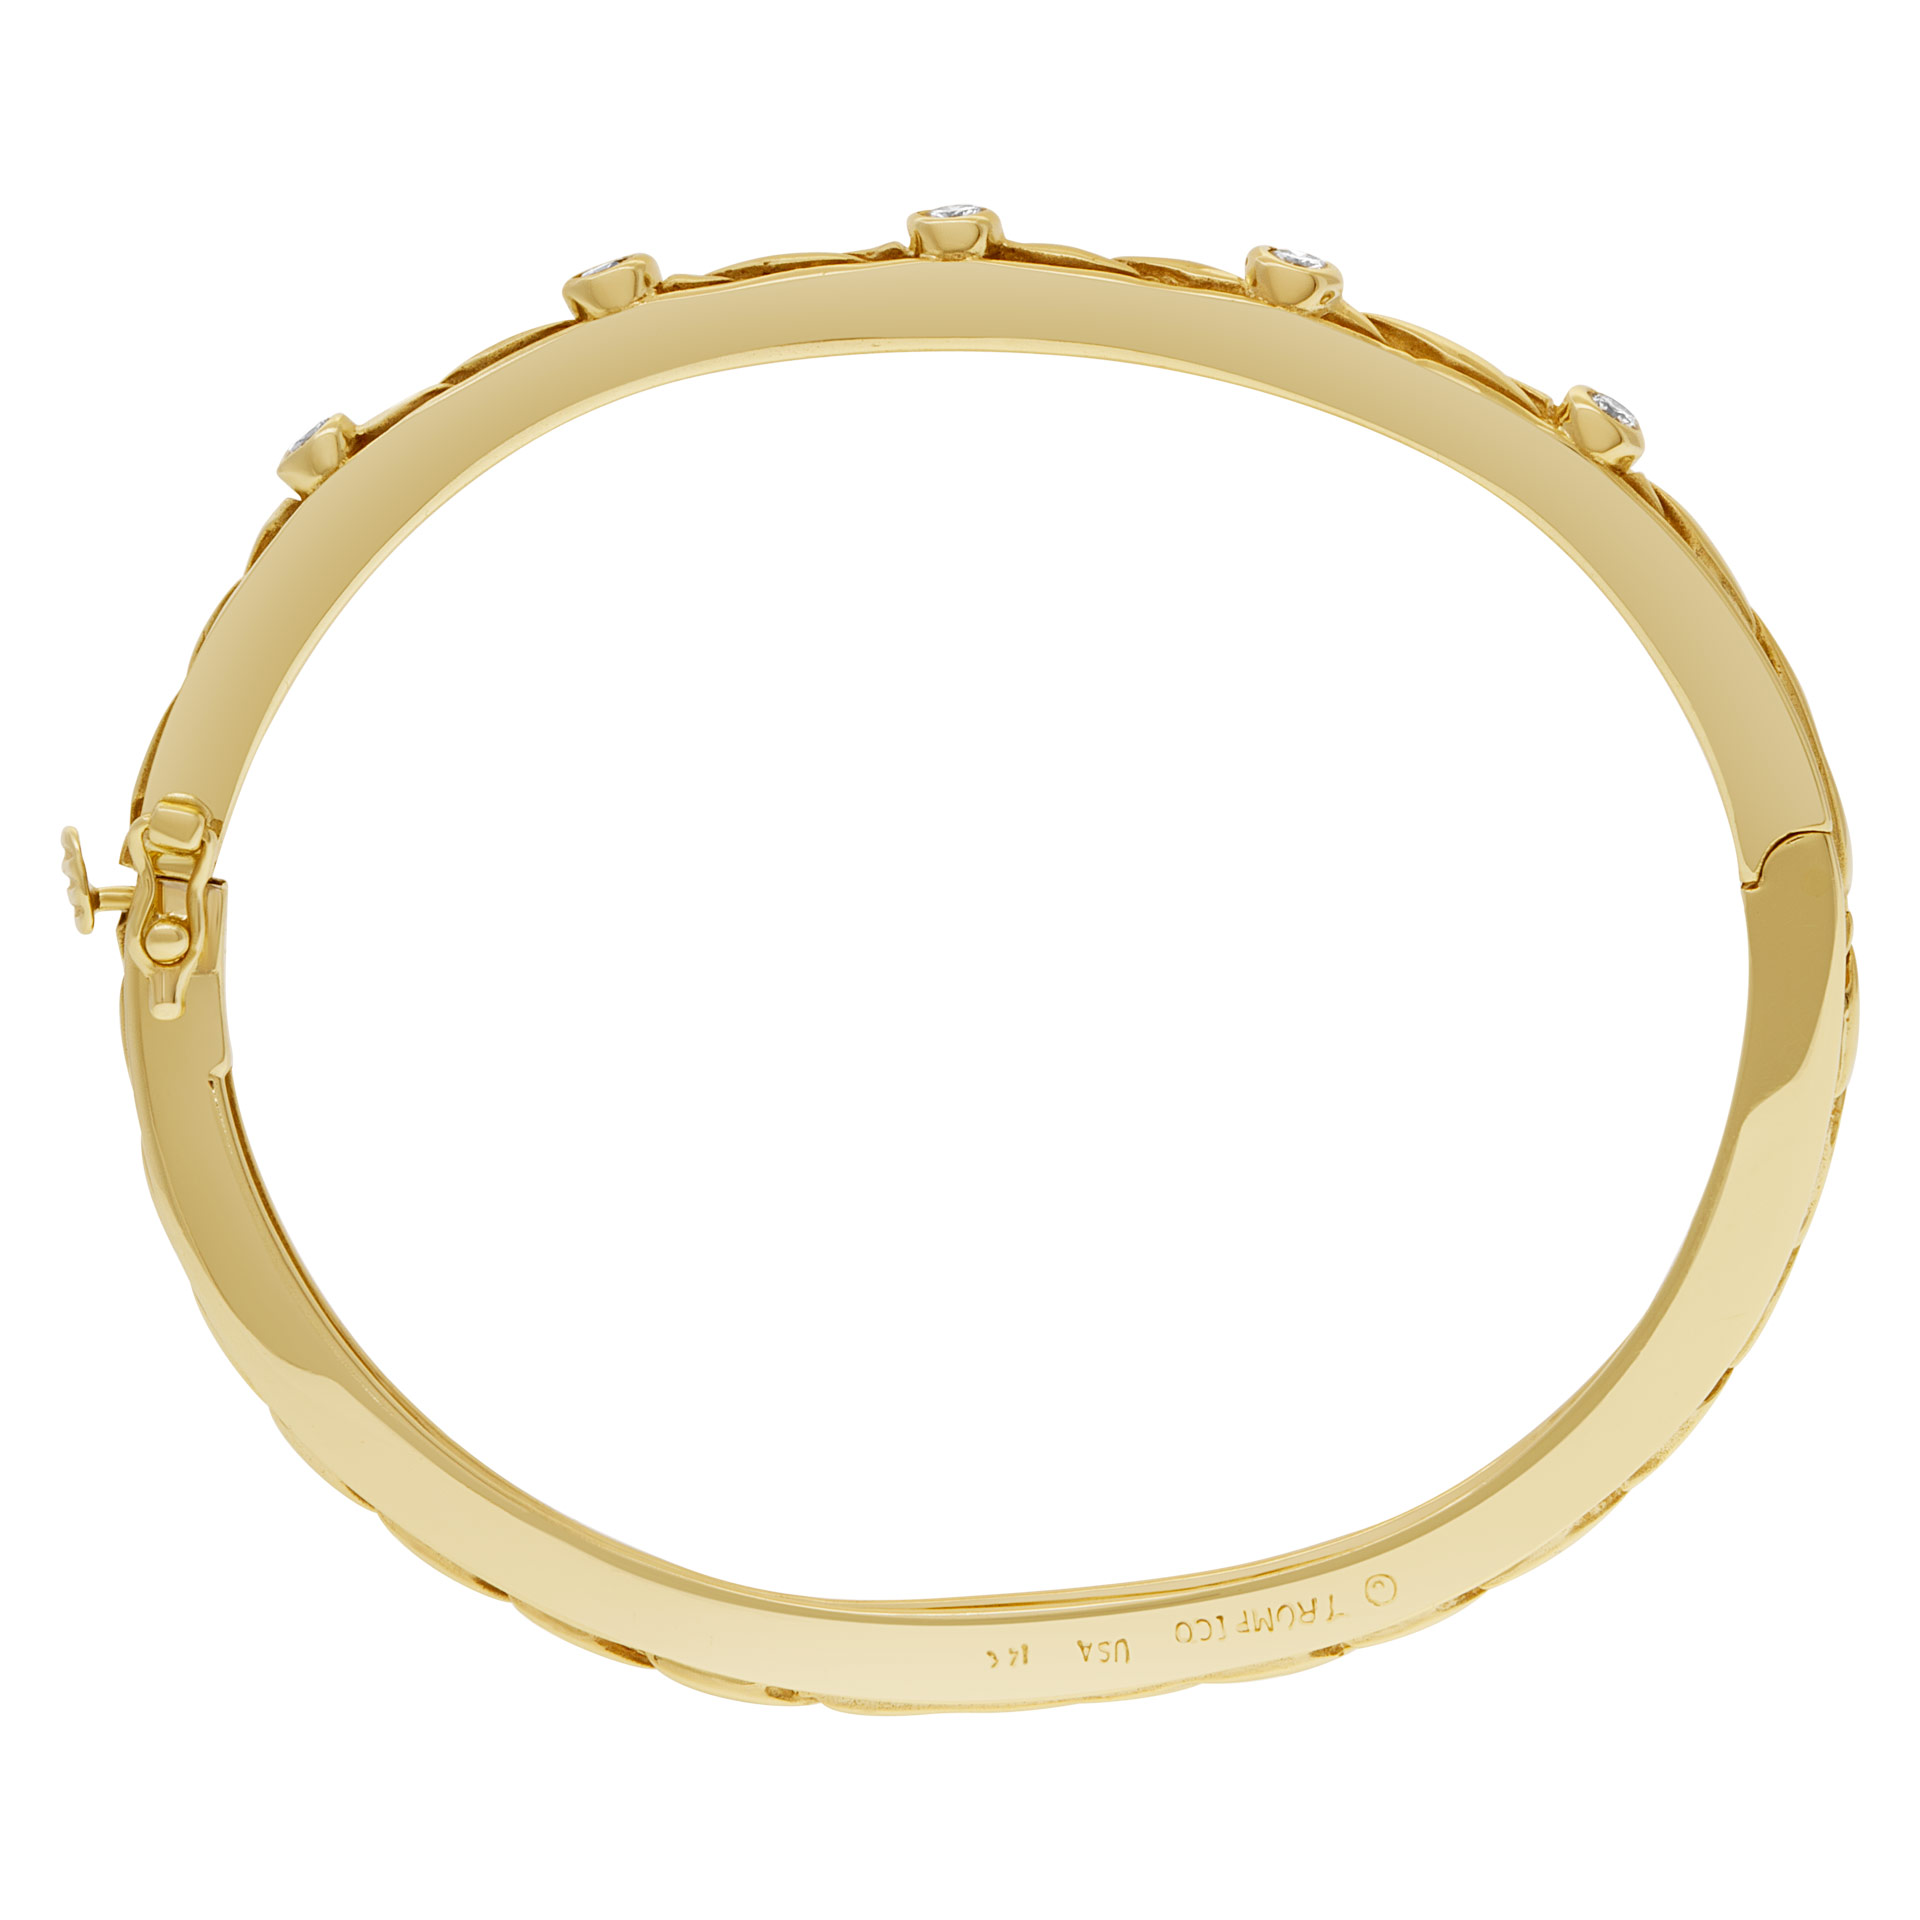 Bangle bracelet with 5 swirls in 14k yellow gold and diamonds image 5